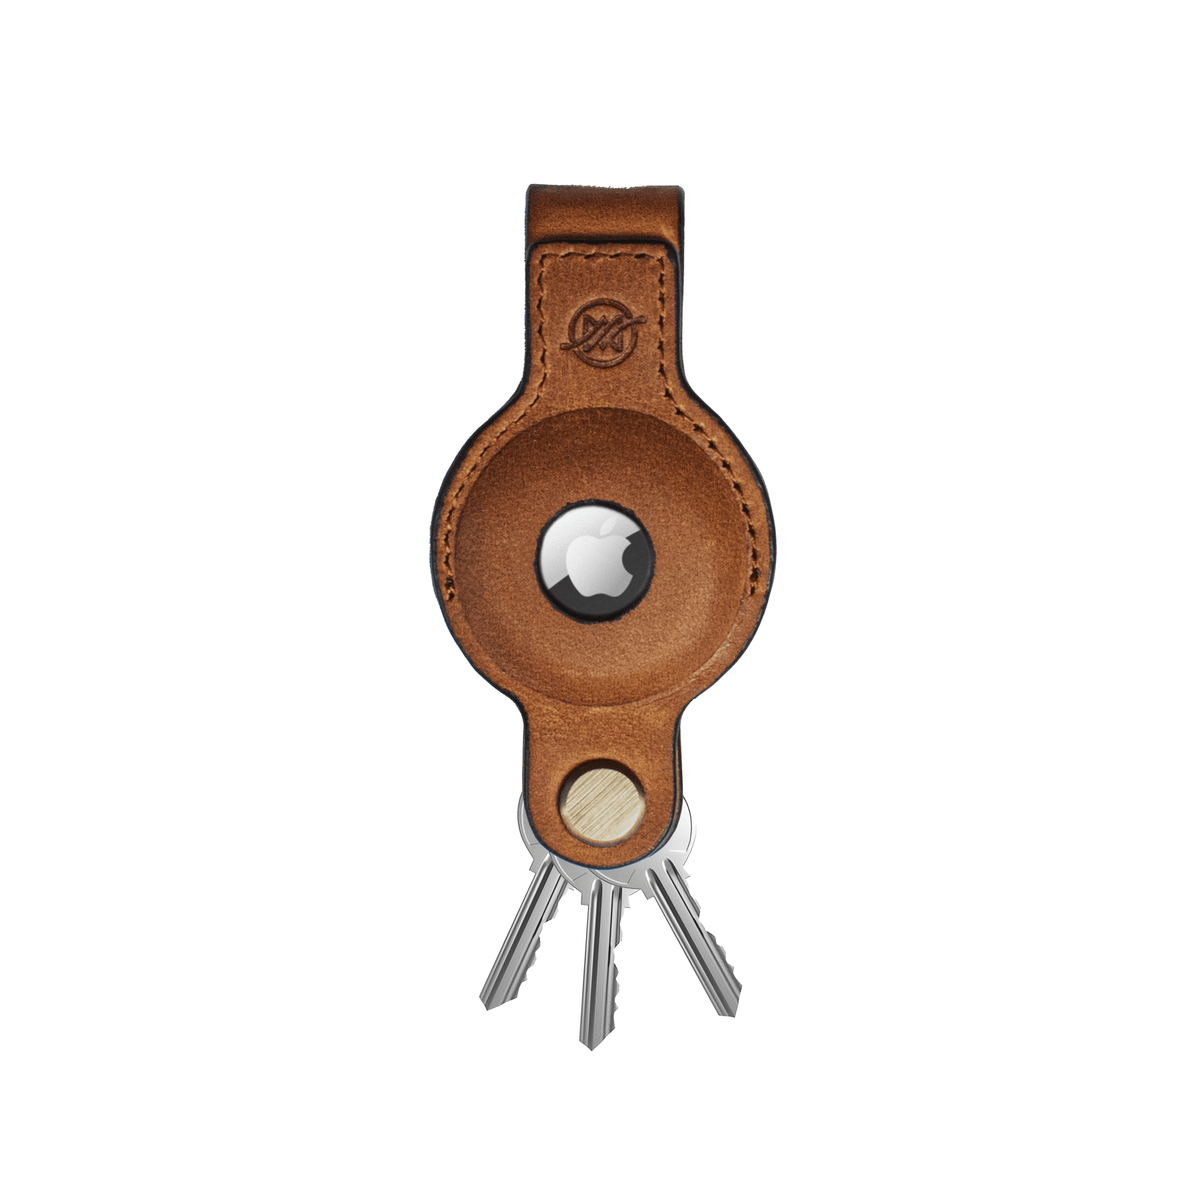 Saddle Brown Key Organizer and Case for Airtag Leather Keychain for AirTag | Key Organizer and Case for Airtag 